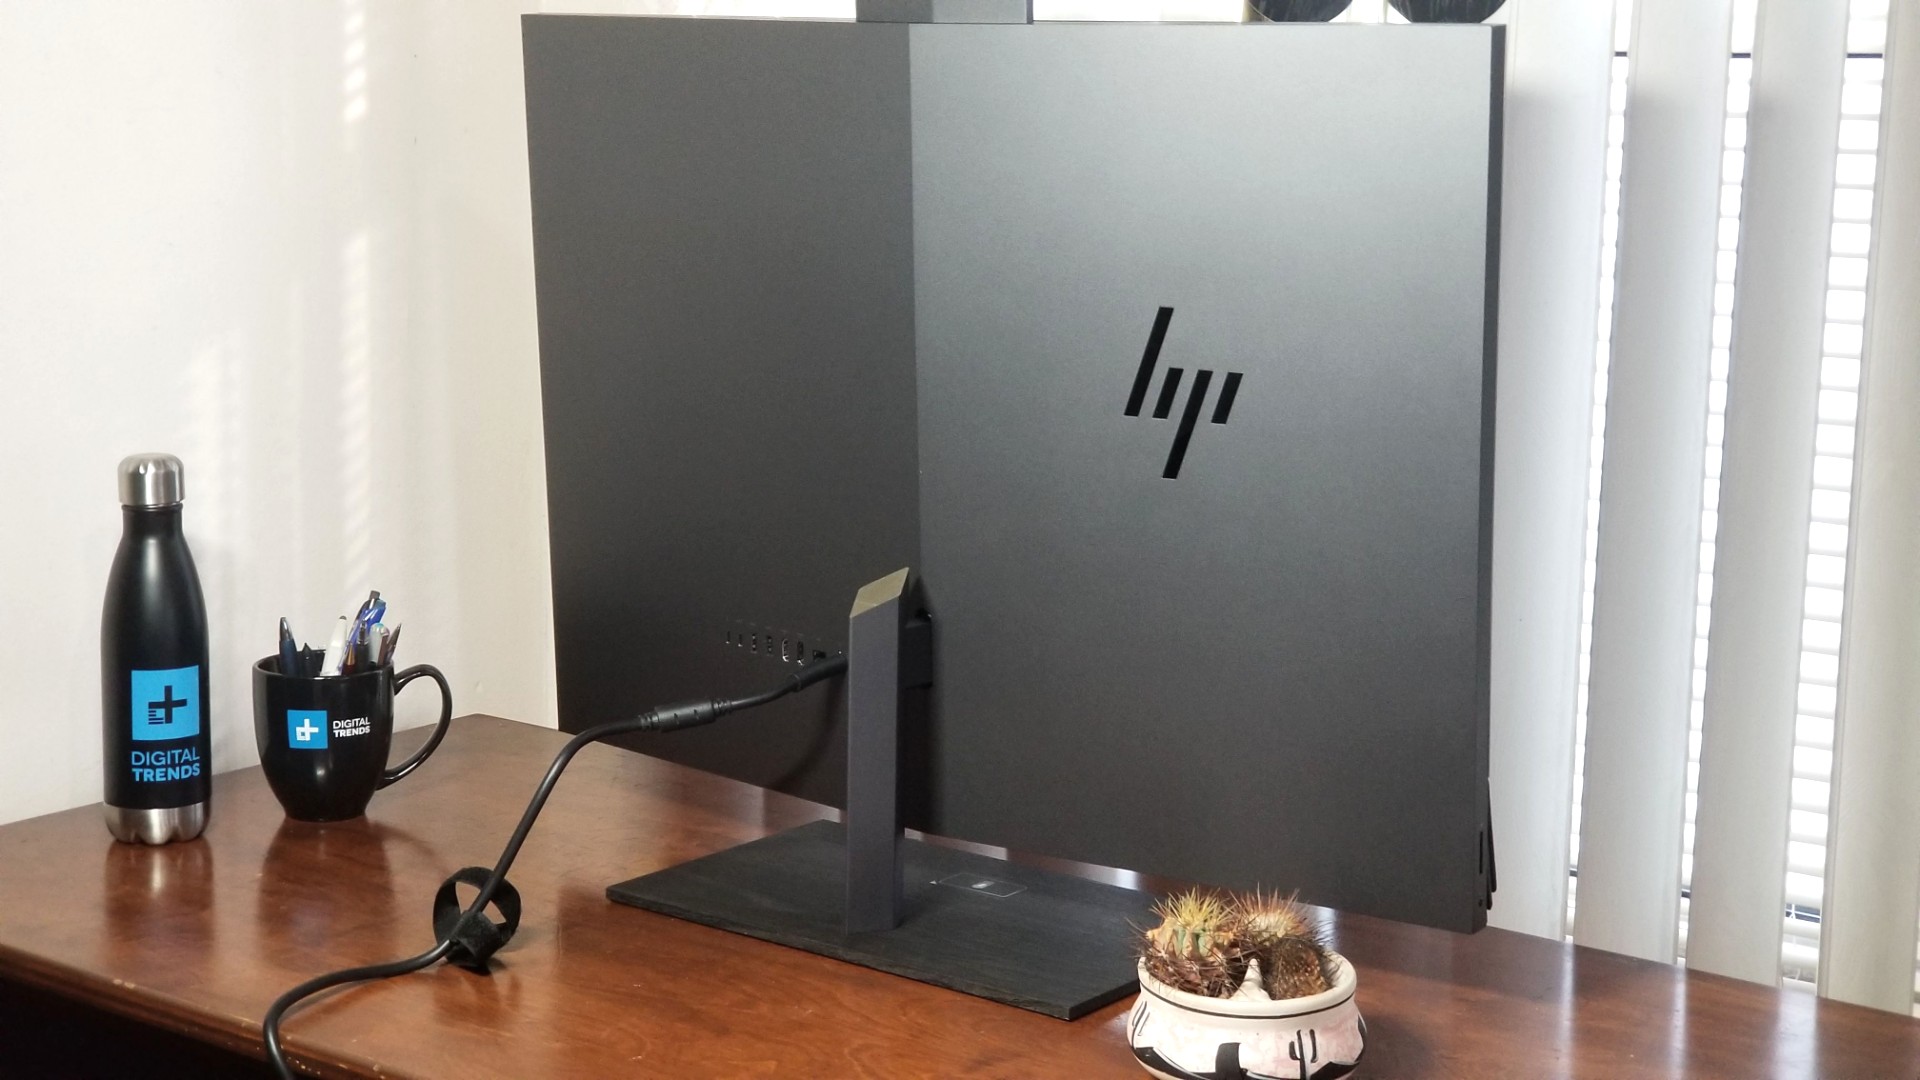 HP Envy 32 All-in-one review: A PC posing as media center